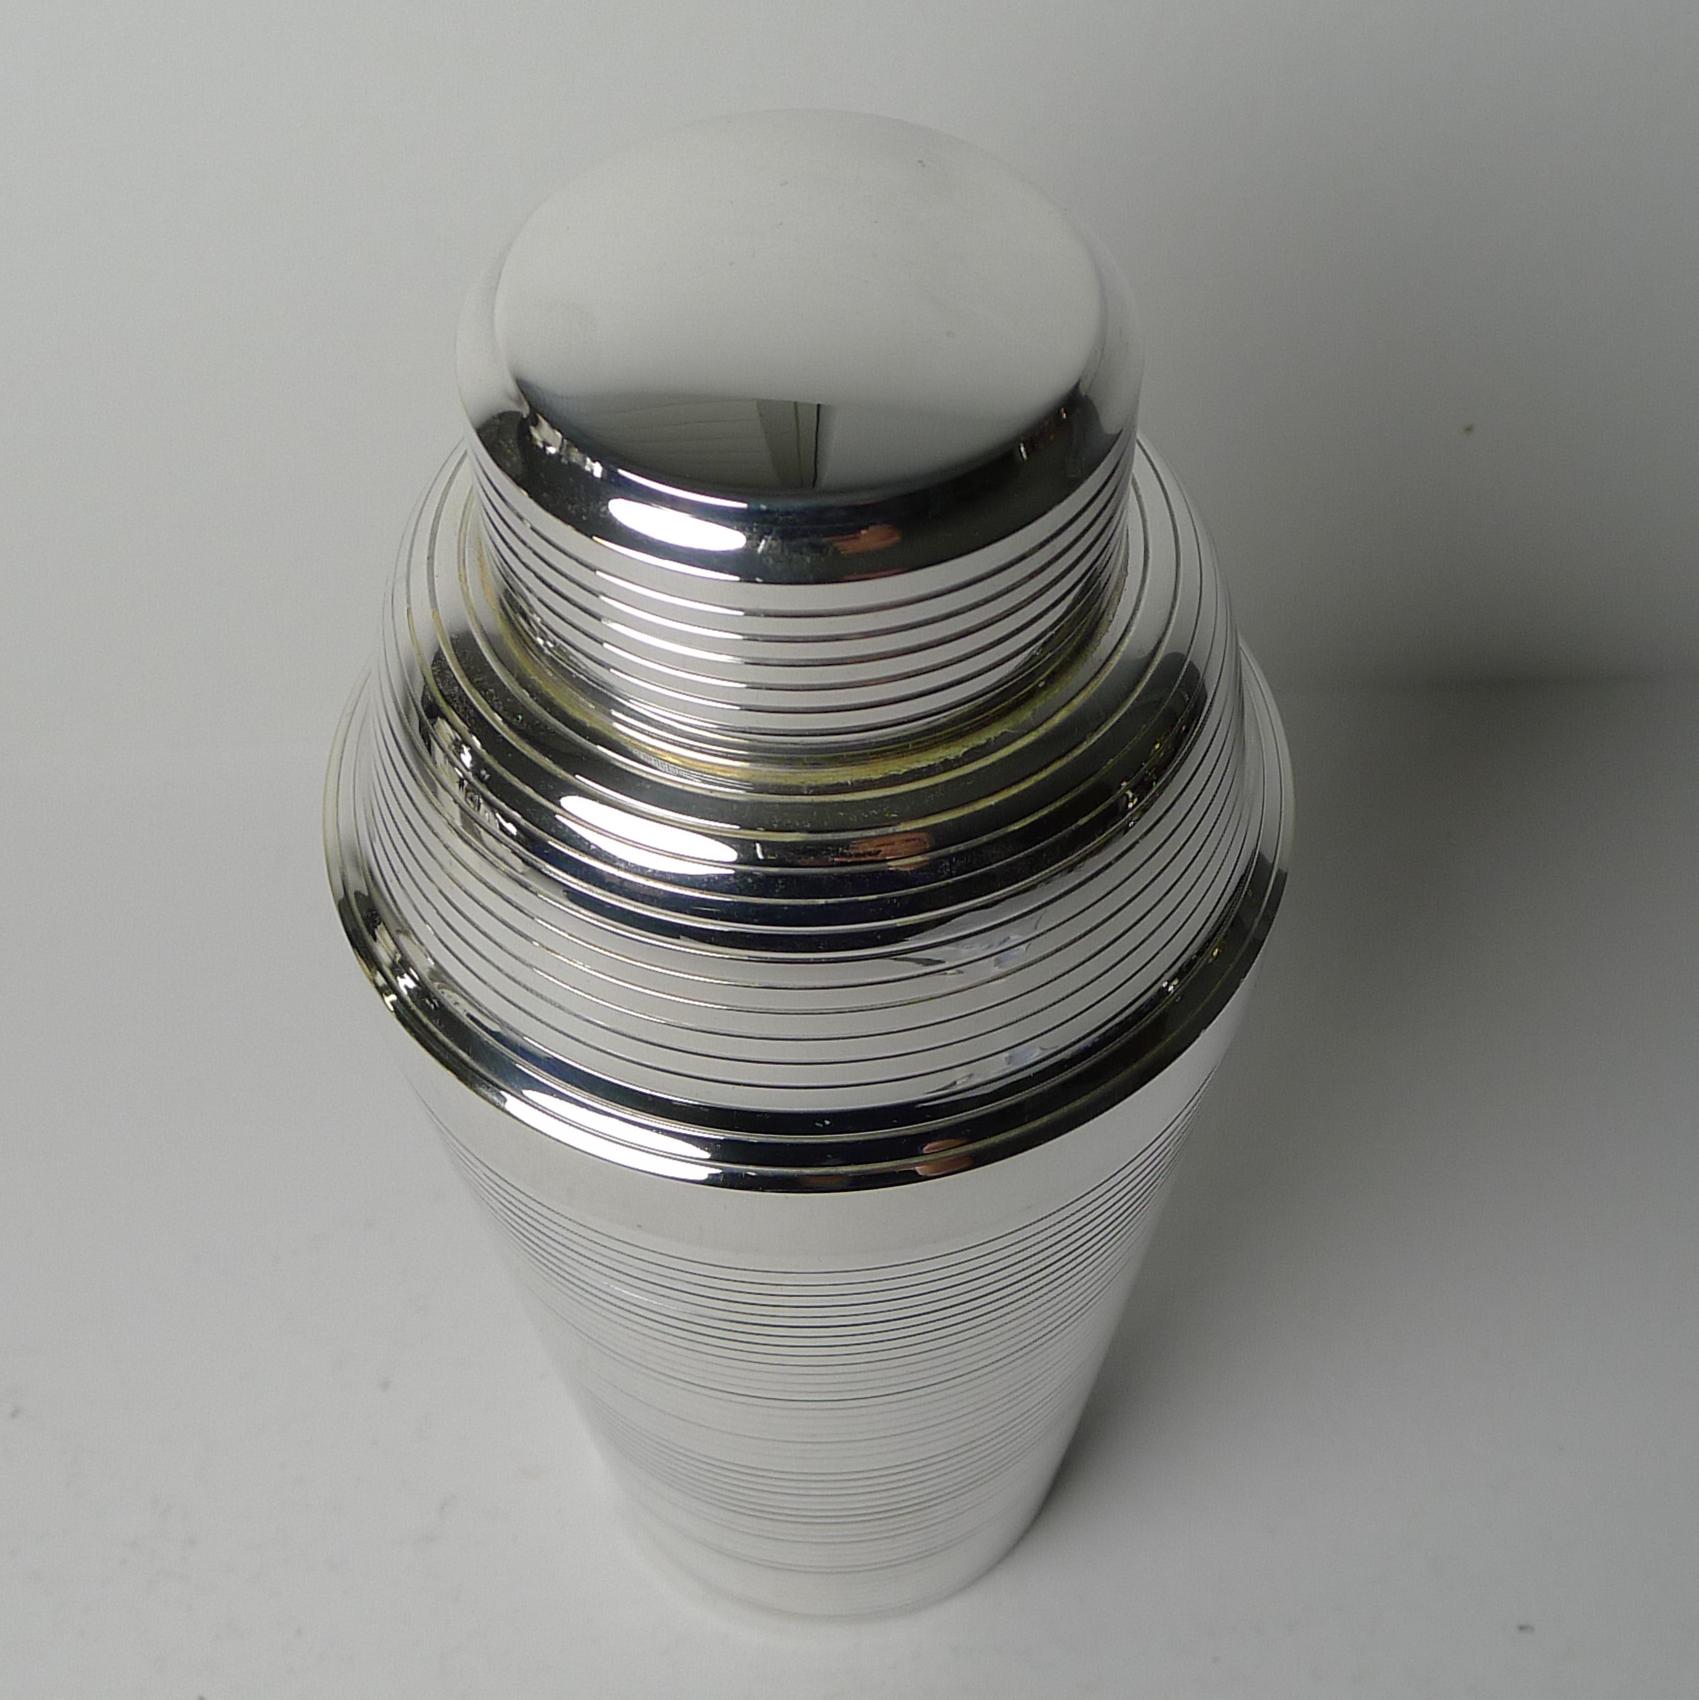 Art Deco Vintage German Silver Plated Cocktail Shaker by Carl Deffner c.1930's For Sale